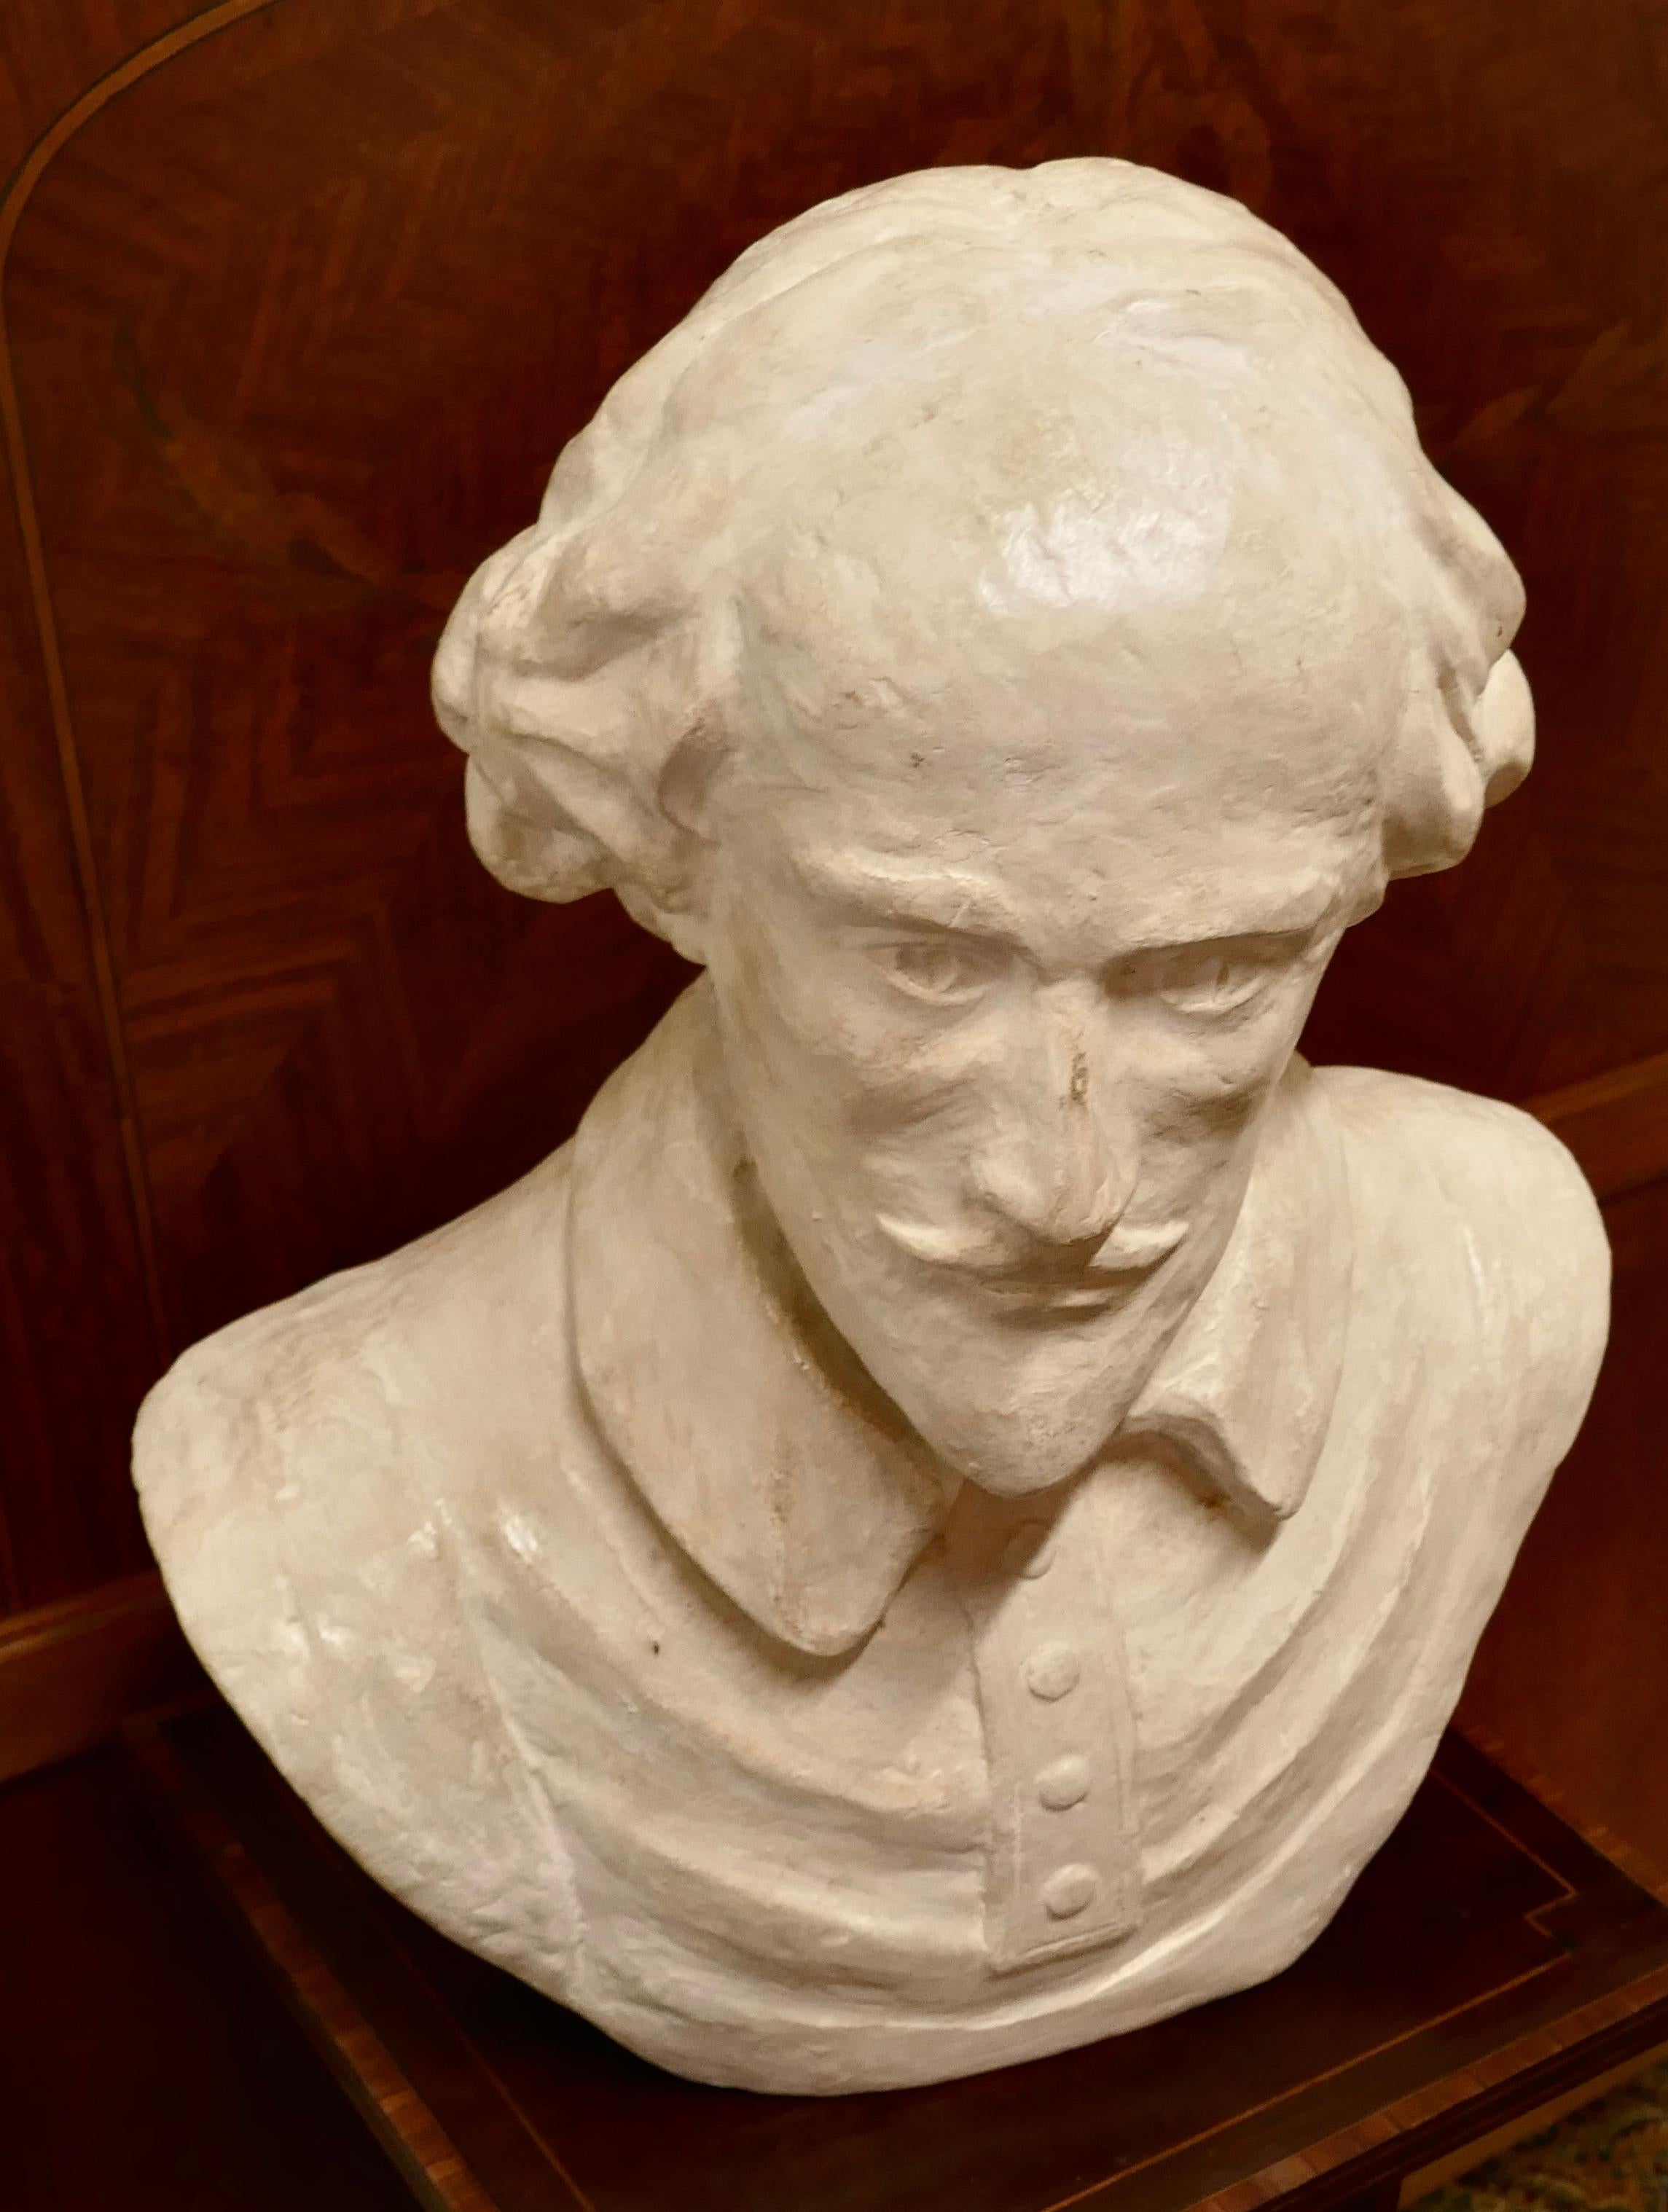 large bust statue